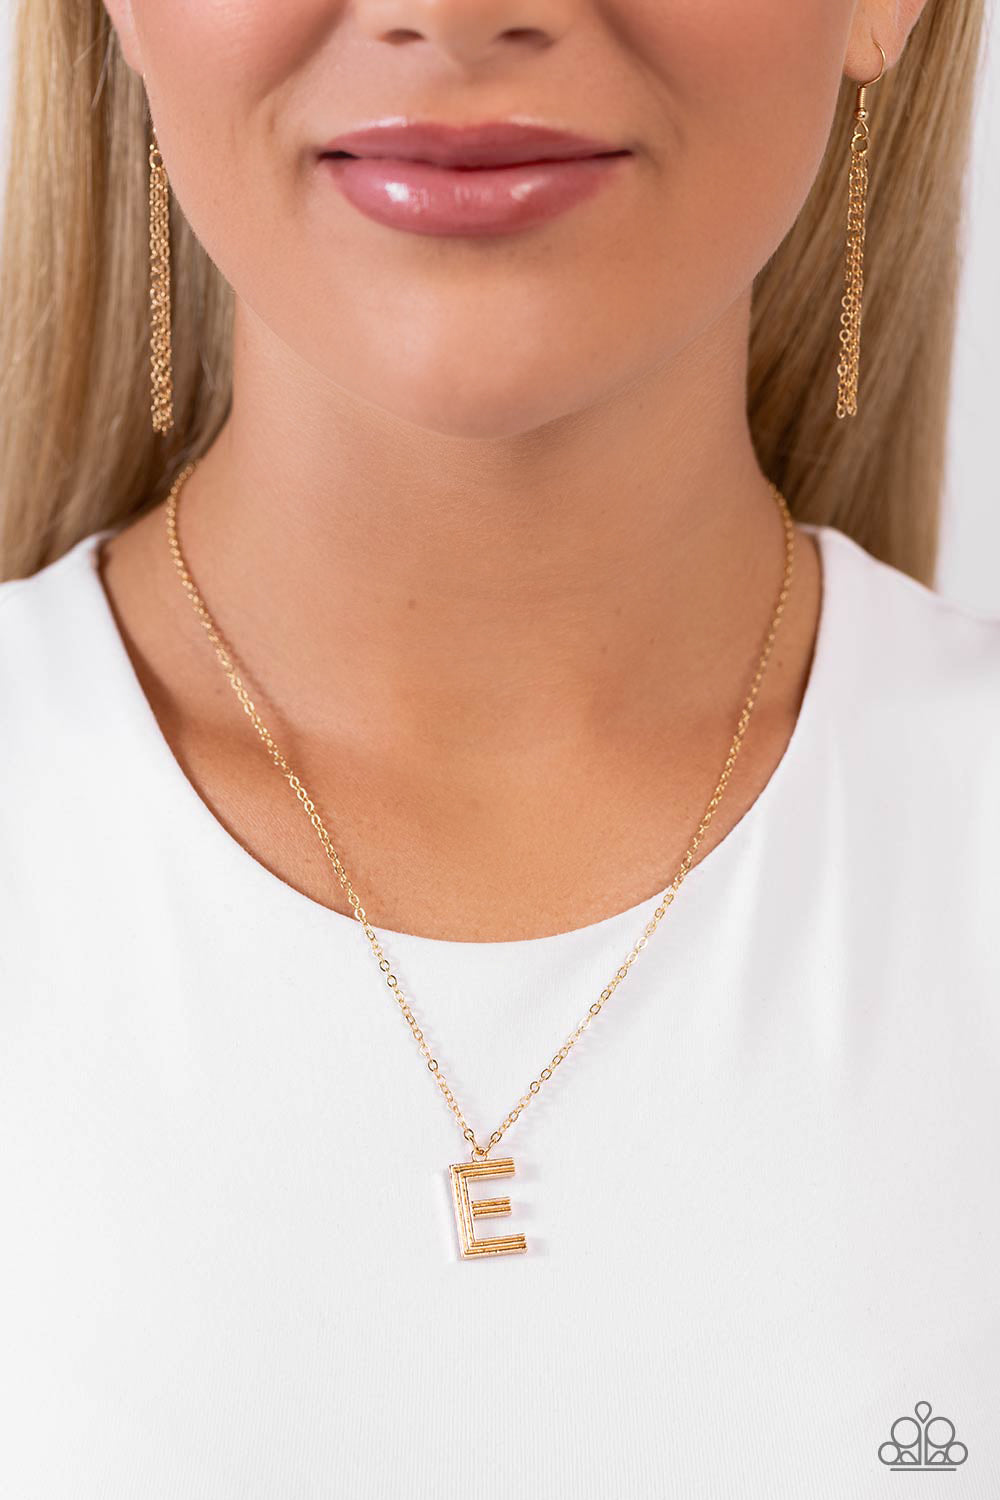 Leave Your Initials Gold * E * Necklace Paparazzi